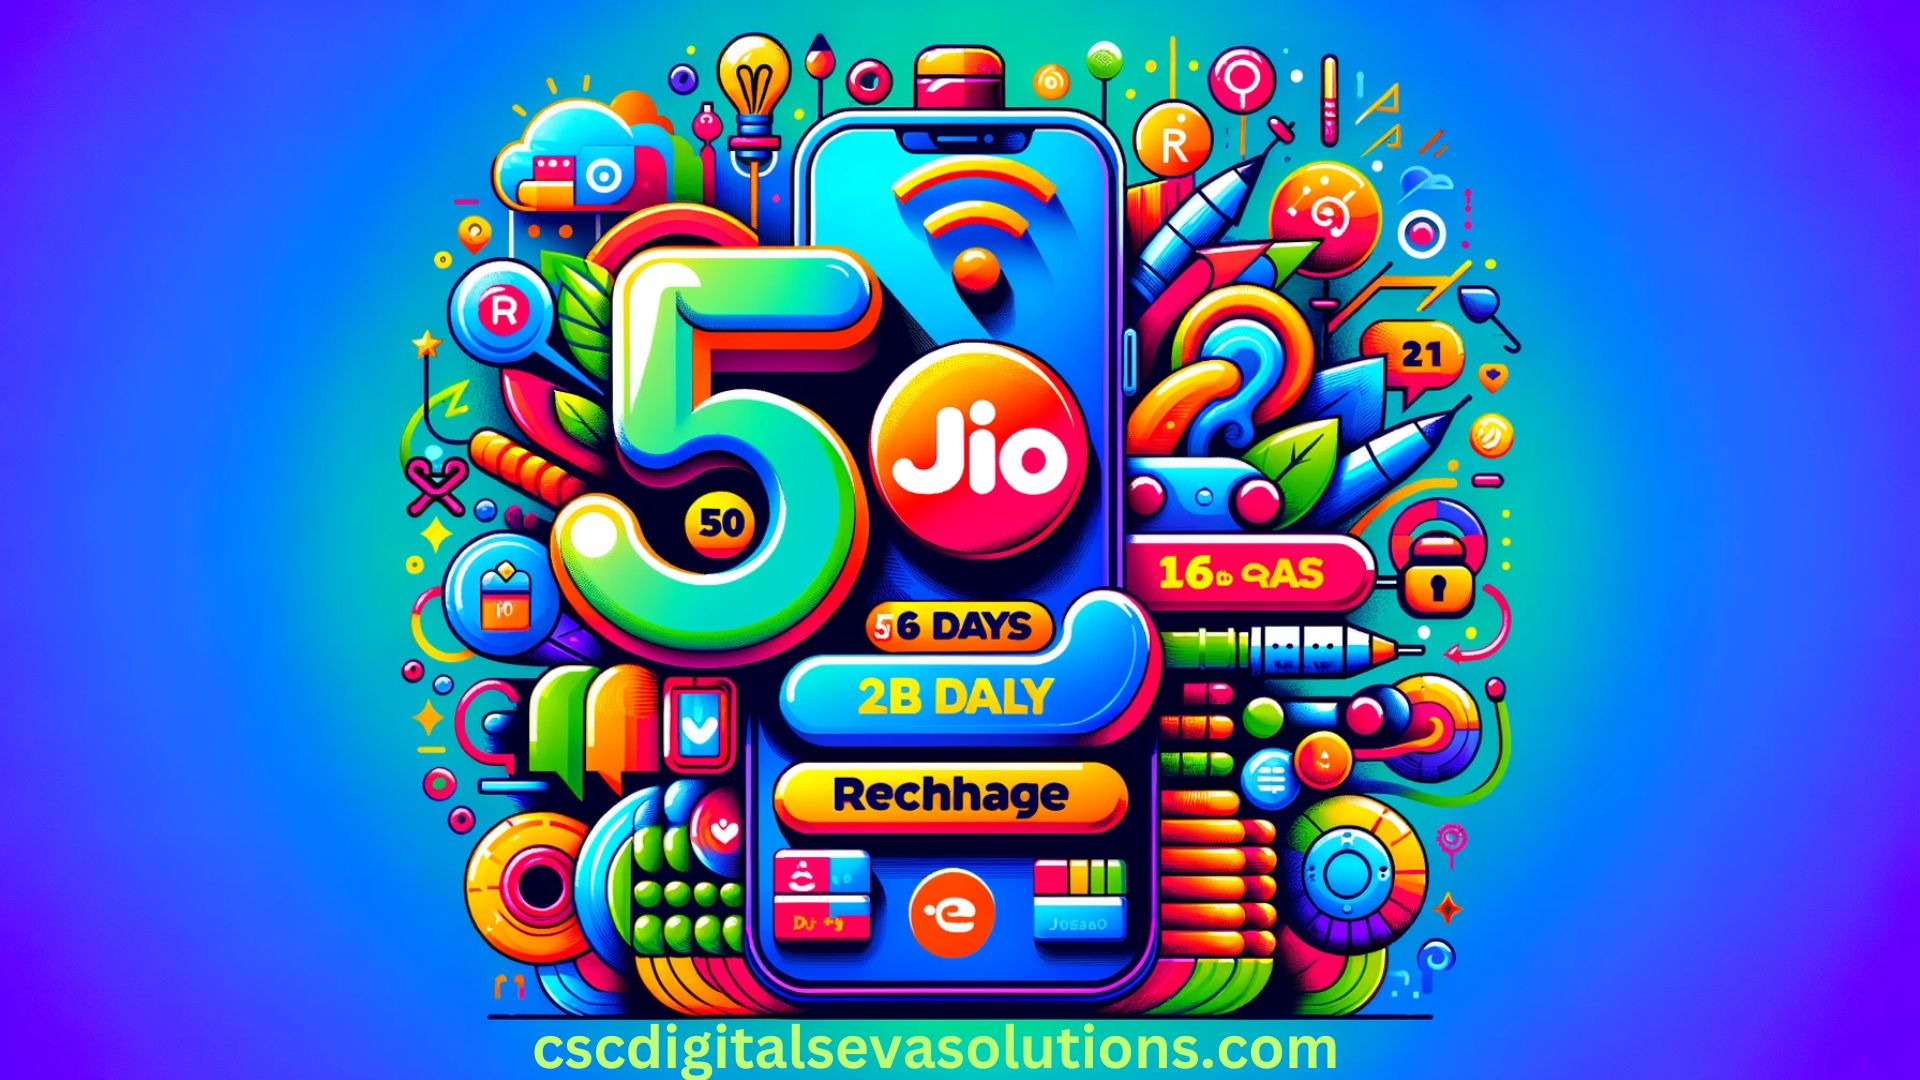 Jio Low Price Recharge